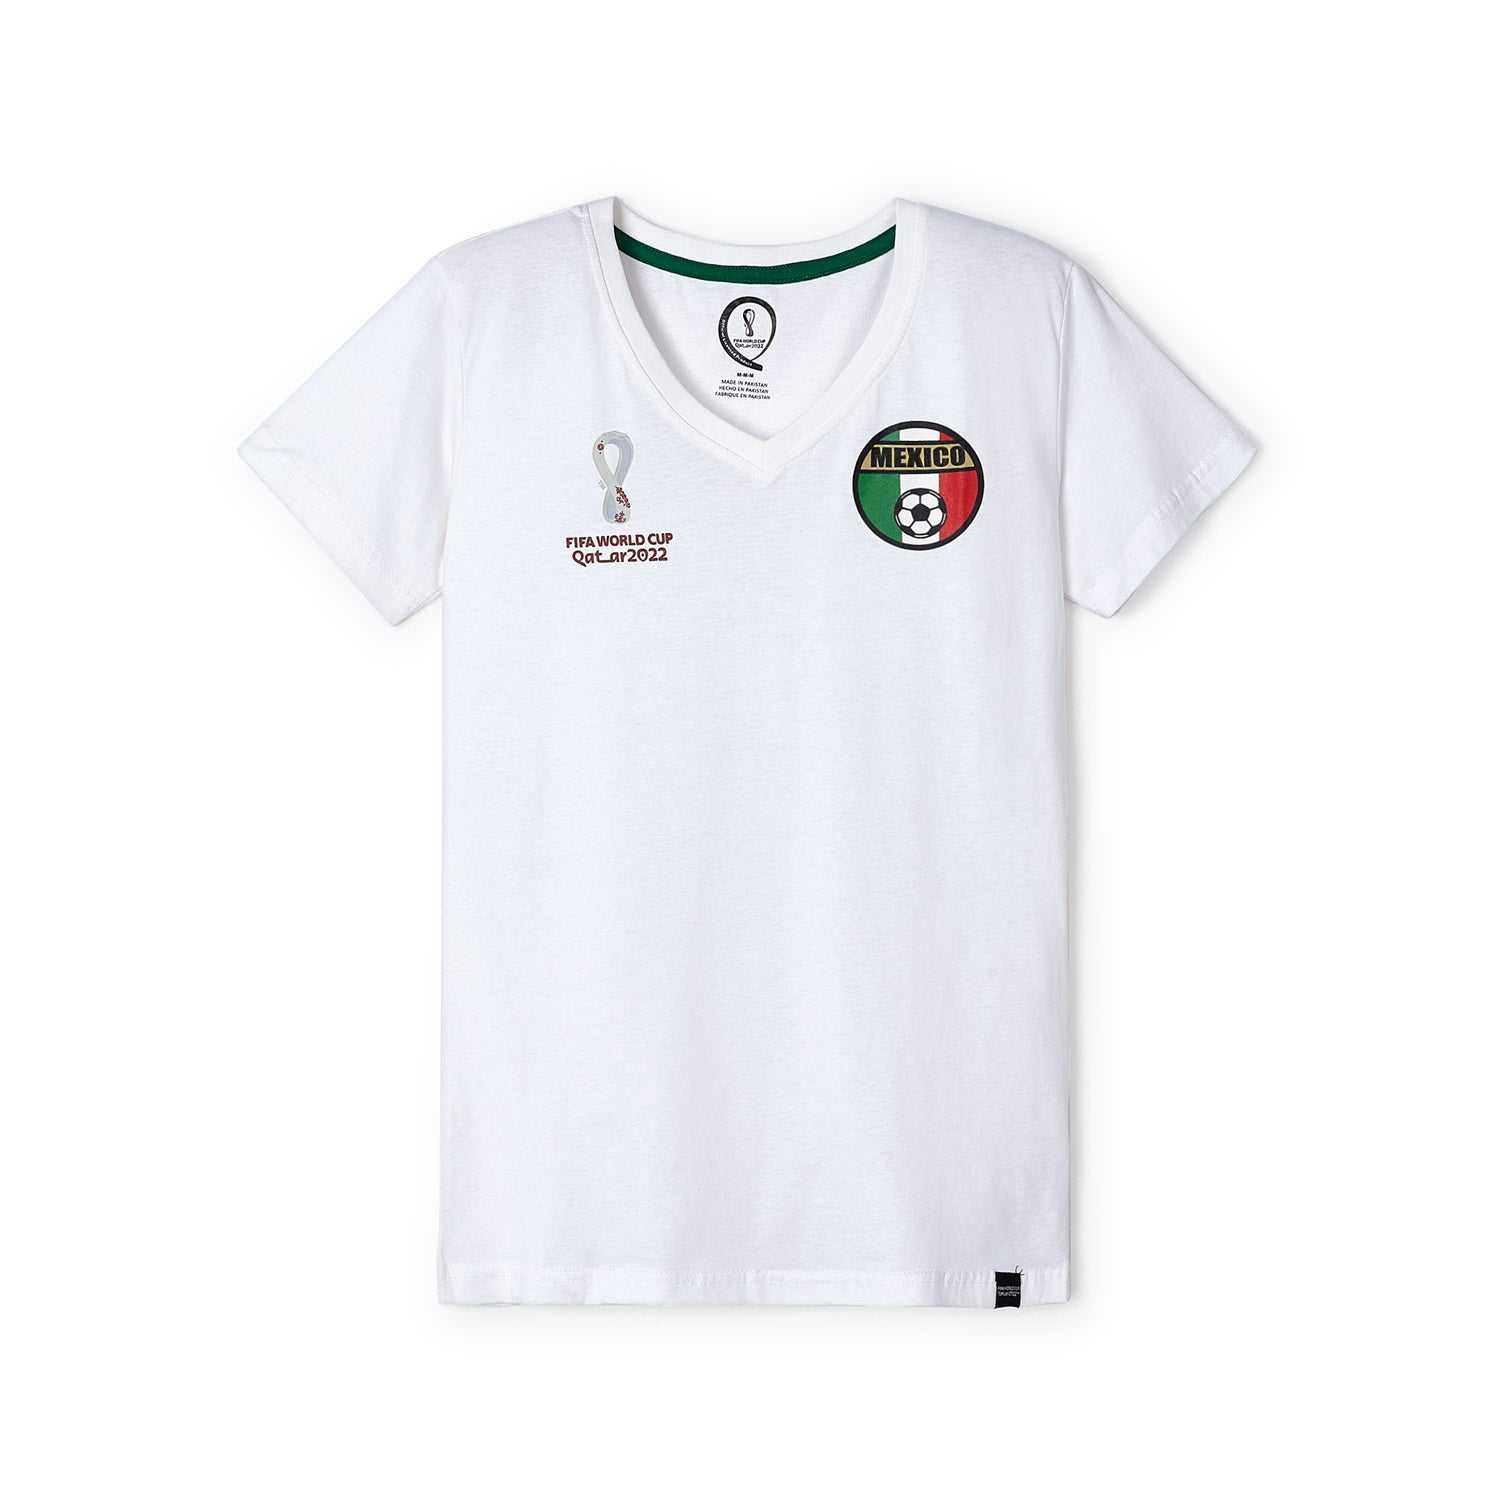 2022 World Cup Mexico White T-Shirt - Women's